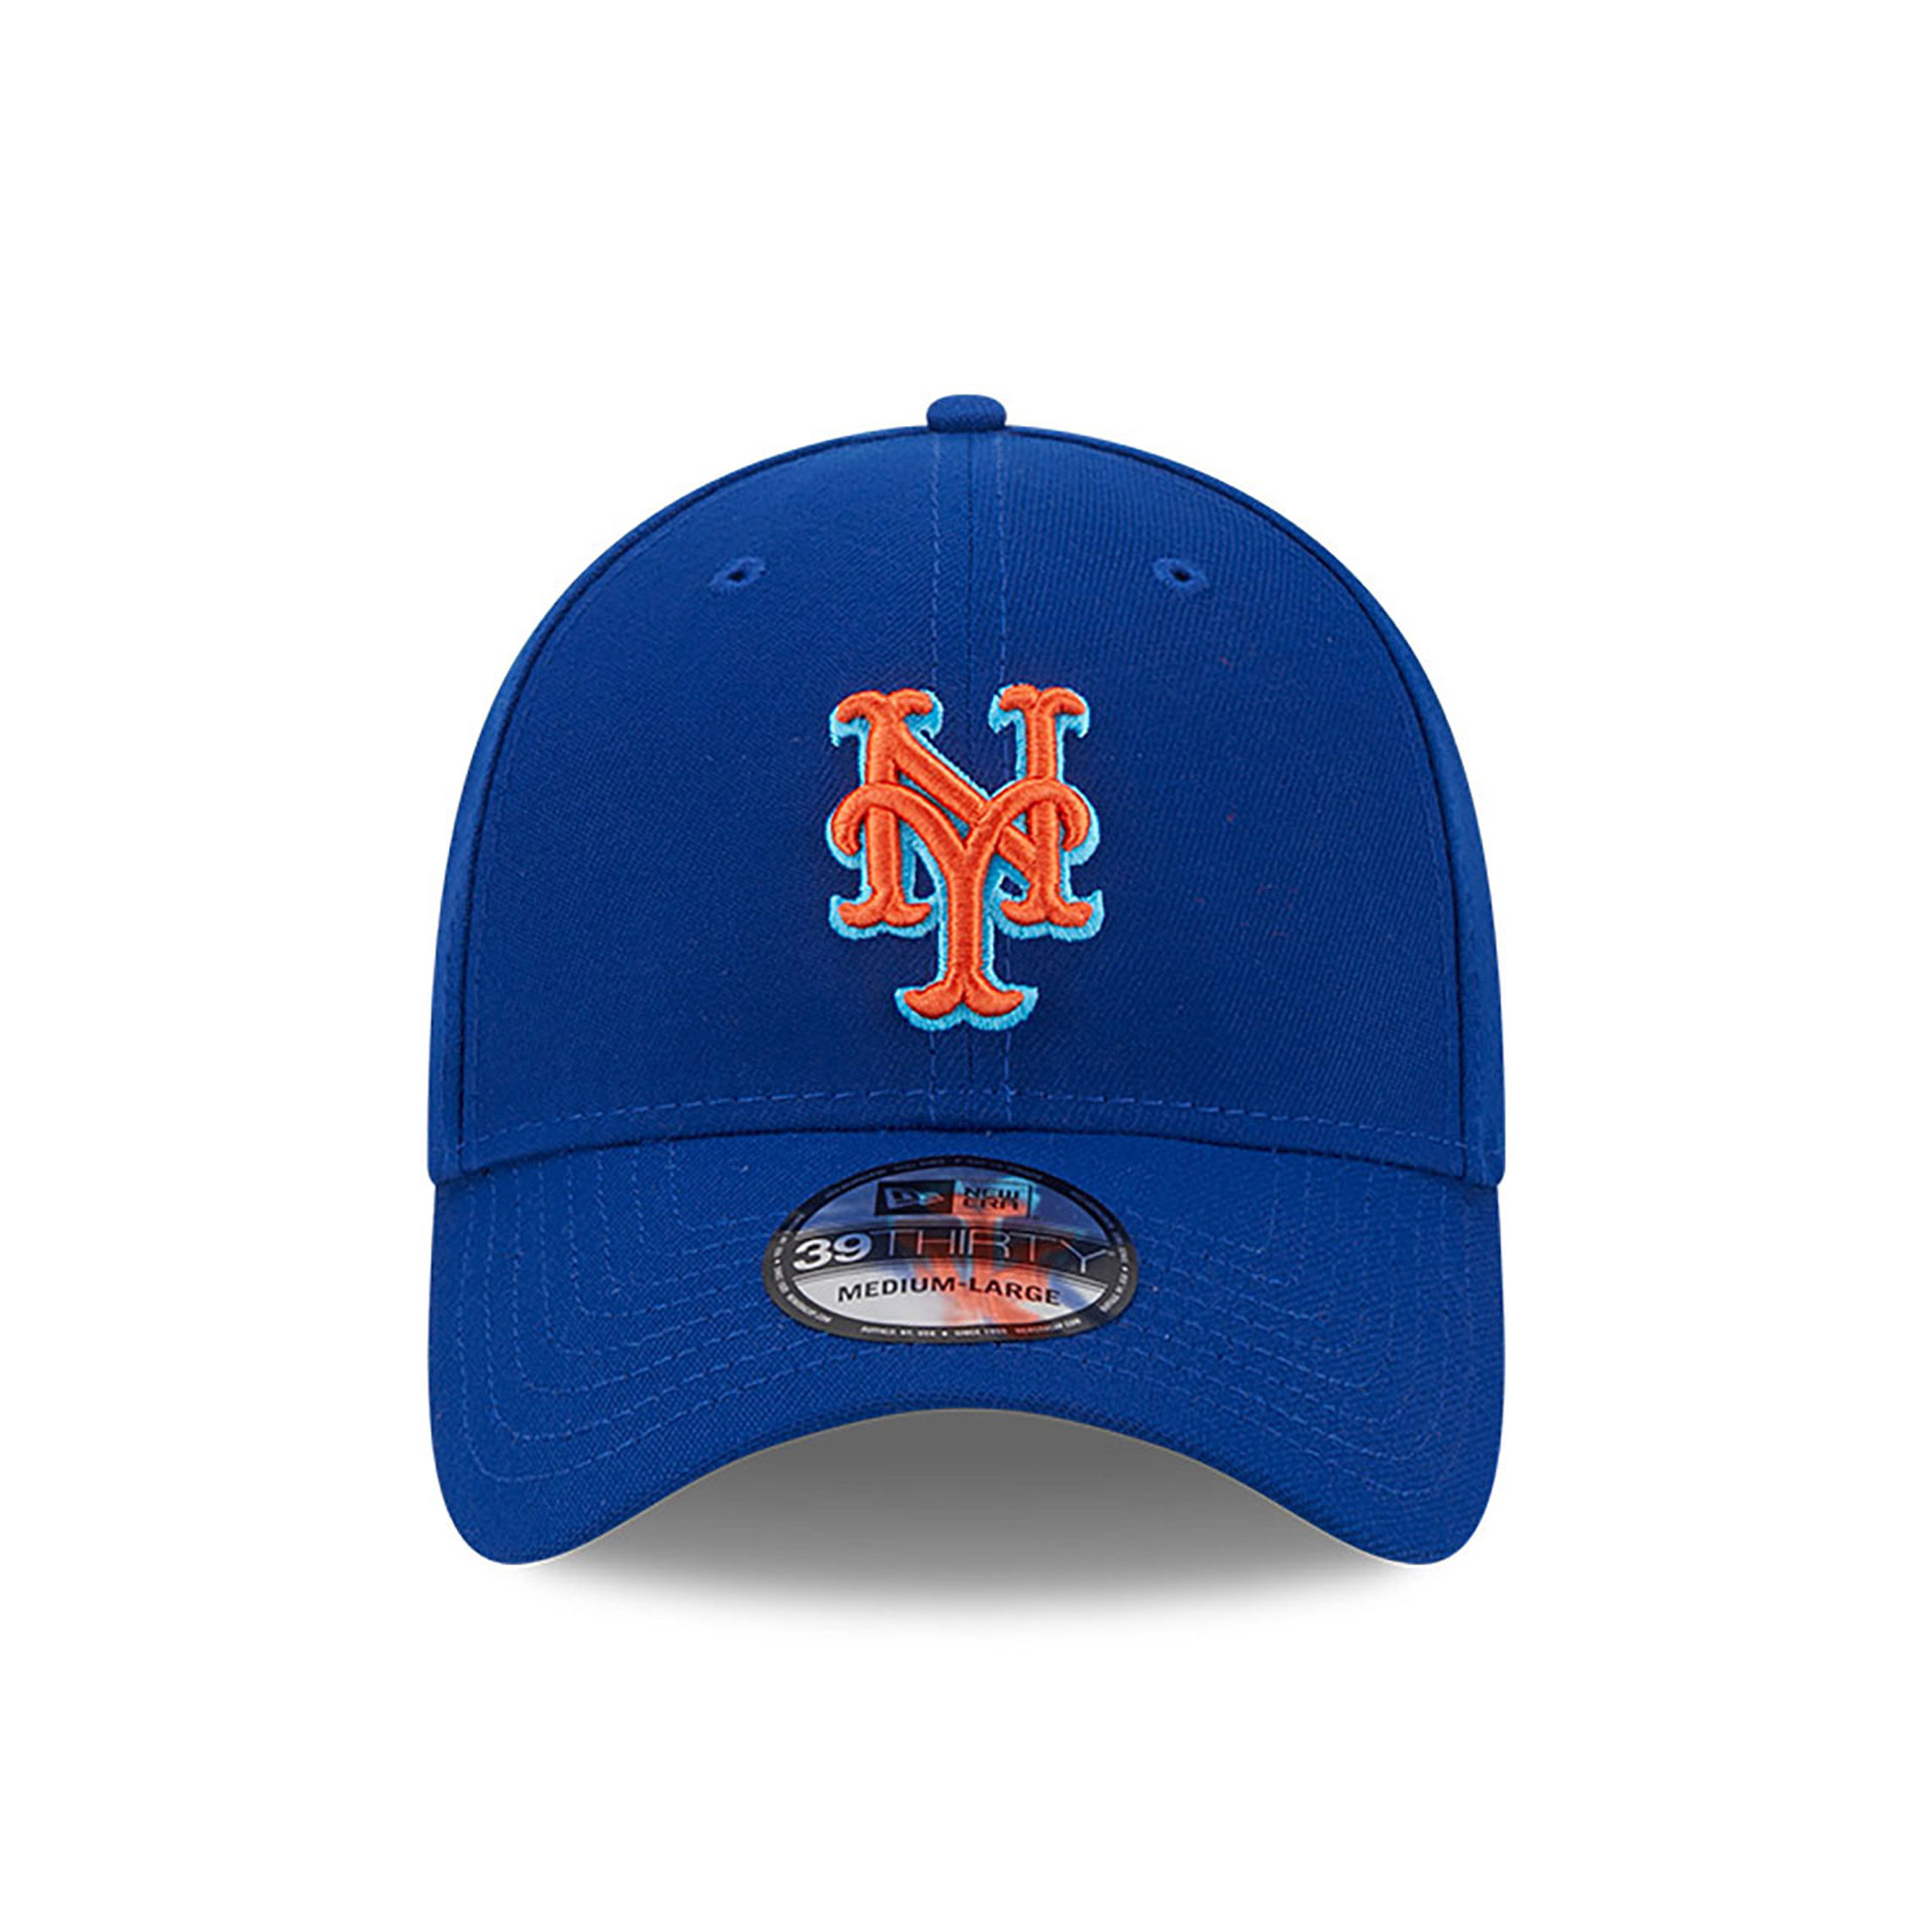 Official New Era MLB Fathers Day New York Mets 39THIRTY Stretch Fit Cap ...